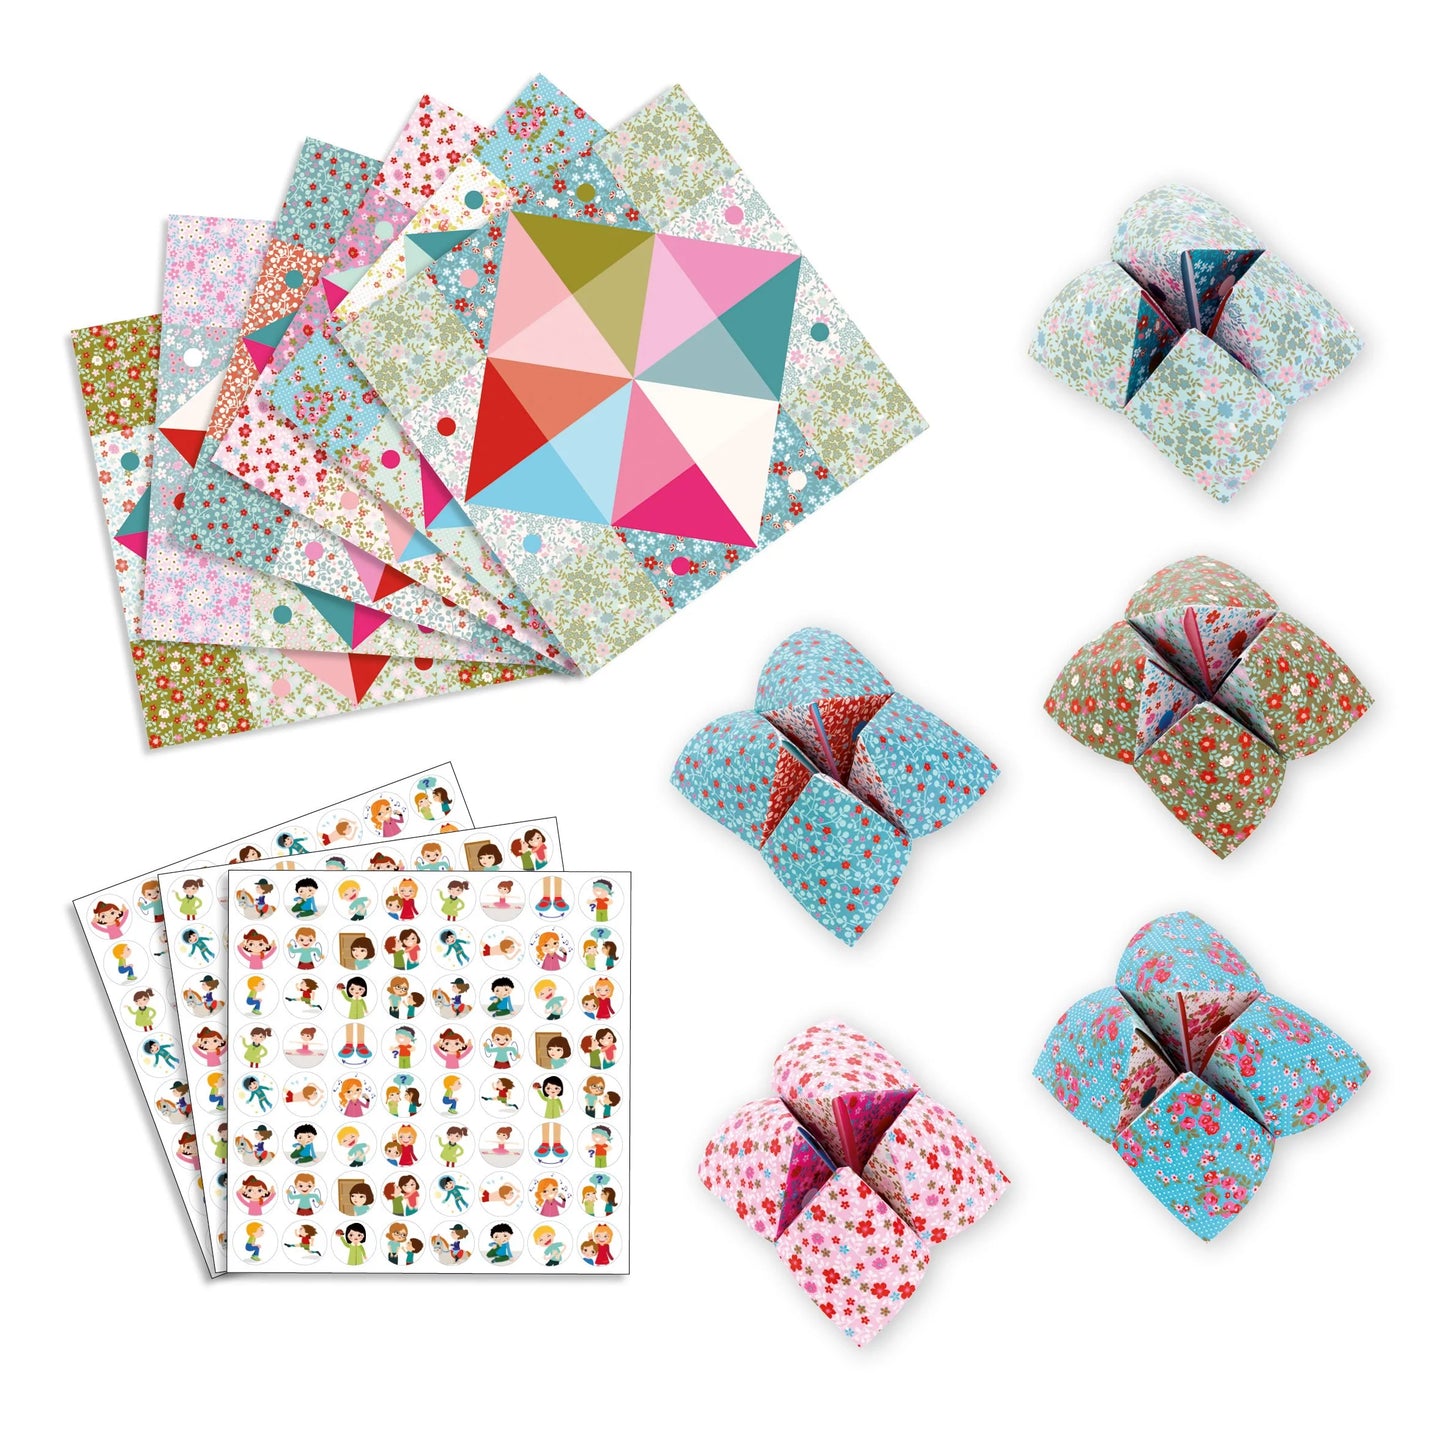 Flower Fortune Tellers Origami Paper Craft Kit